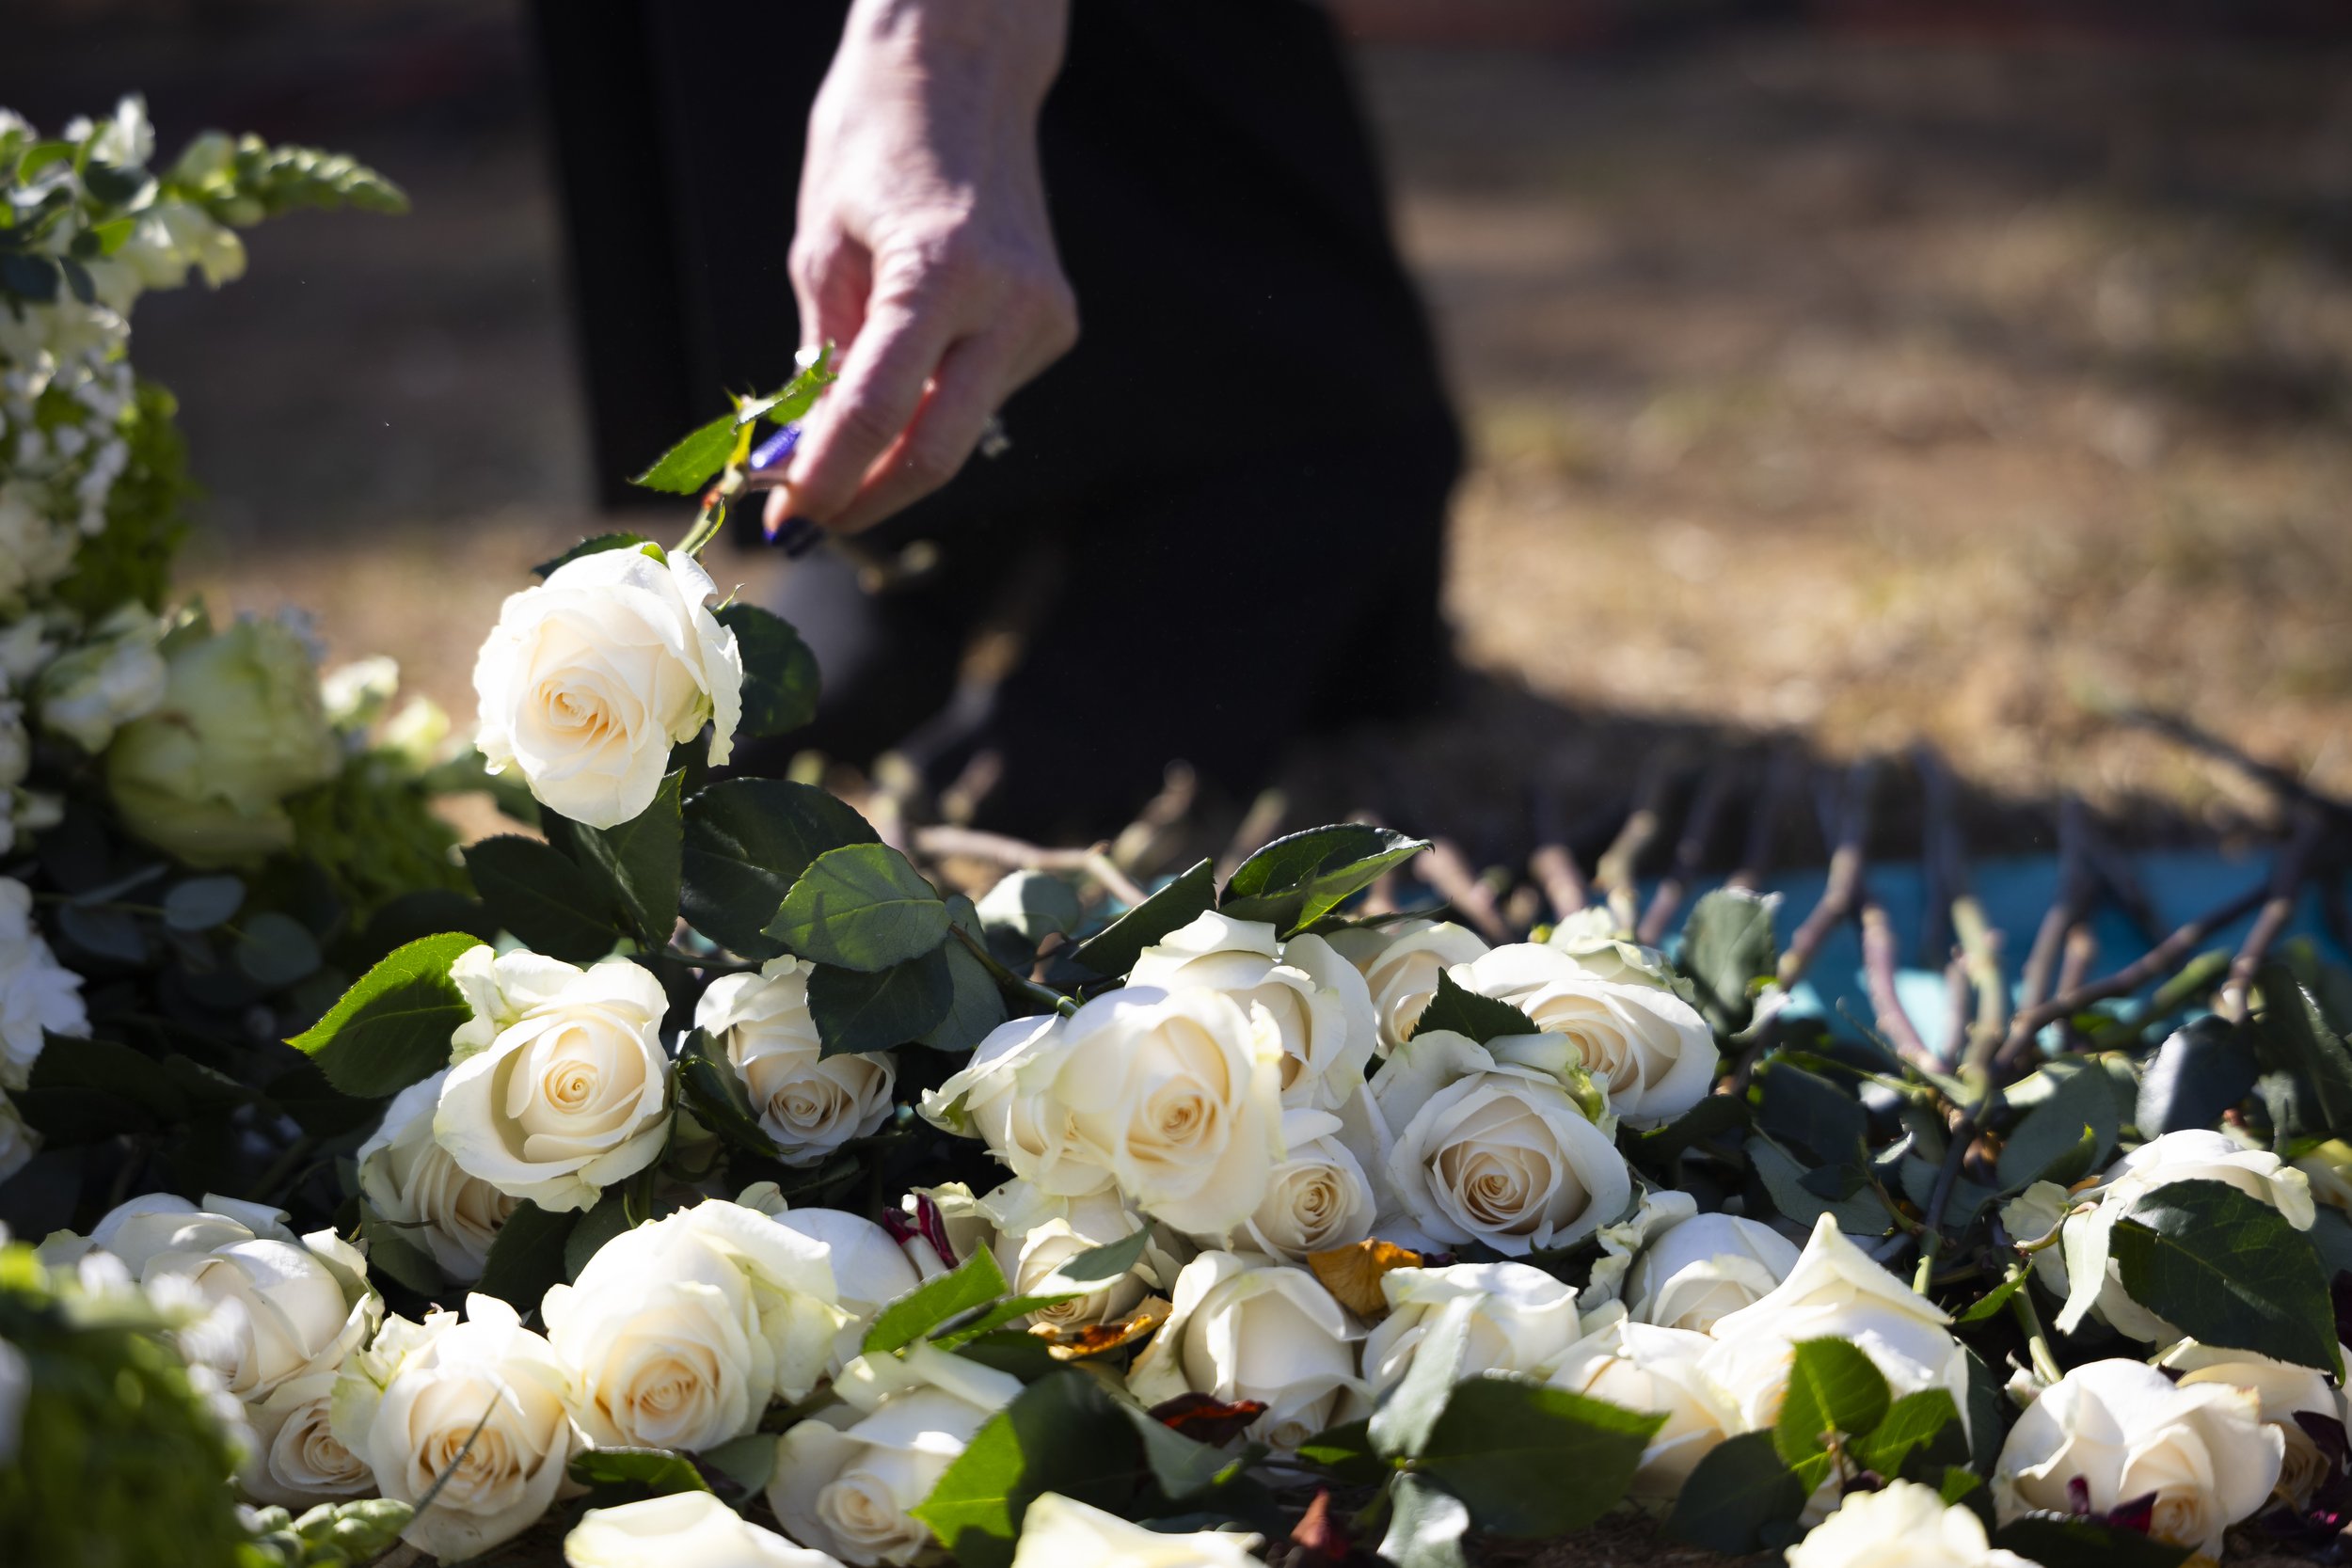  A women places a white rose on the grave marking the 1,937 individuals who died in 2020 and either did not have next of kin, or were not claimed by their next of kin during LA County Ceremony of the Unclaimed Dead at the LA County Cemetery, in Los A